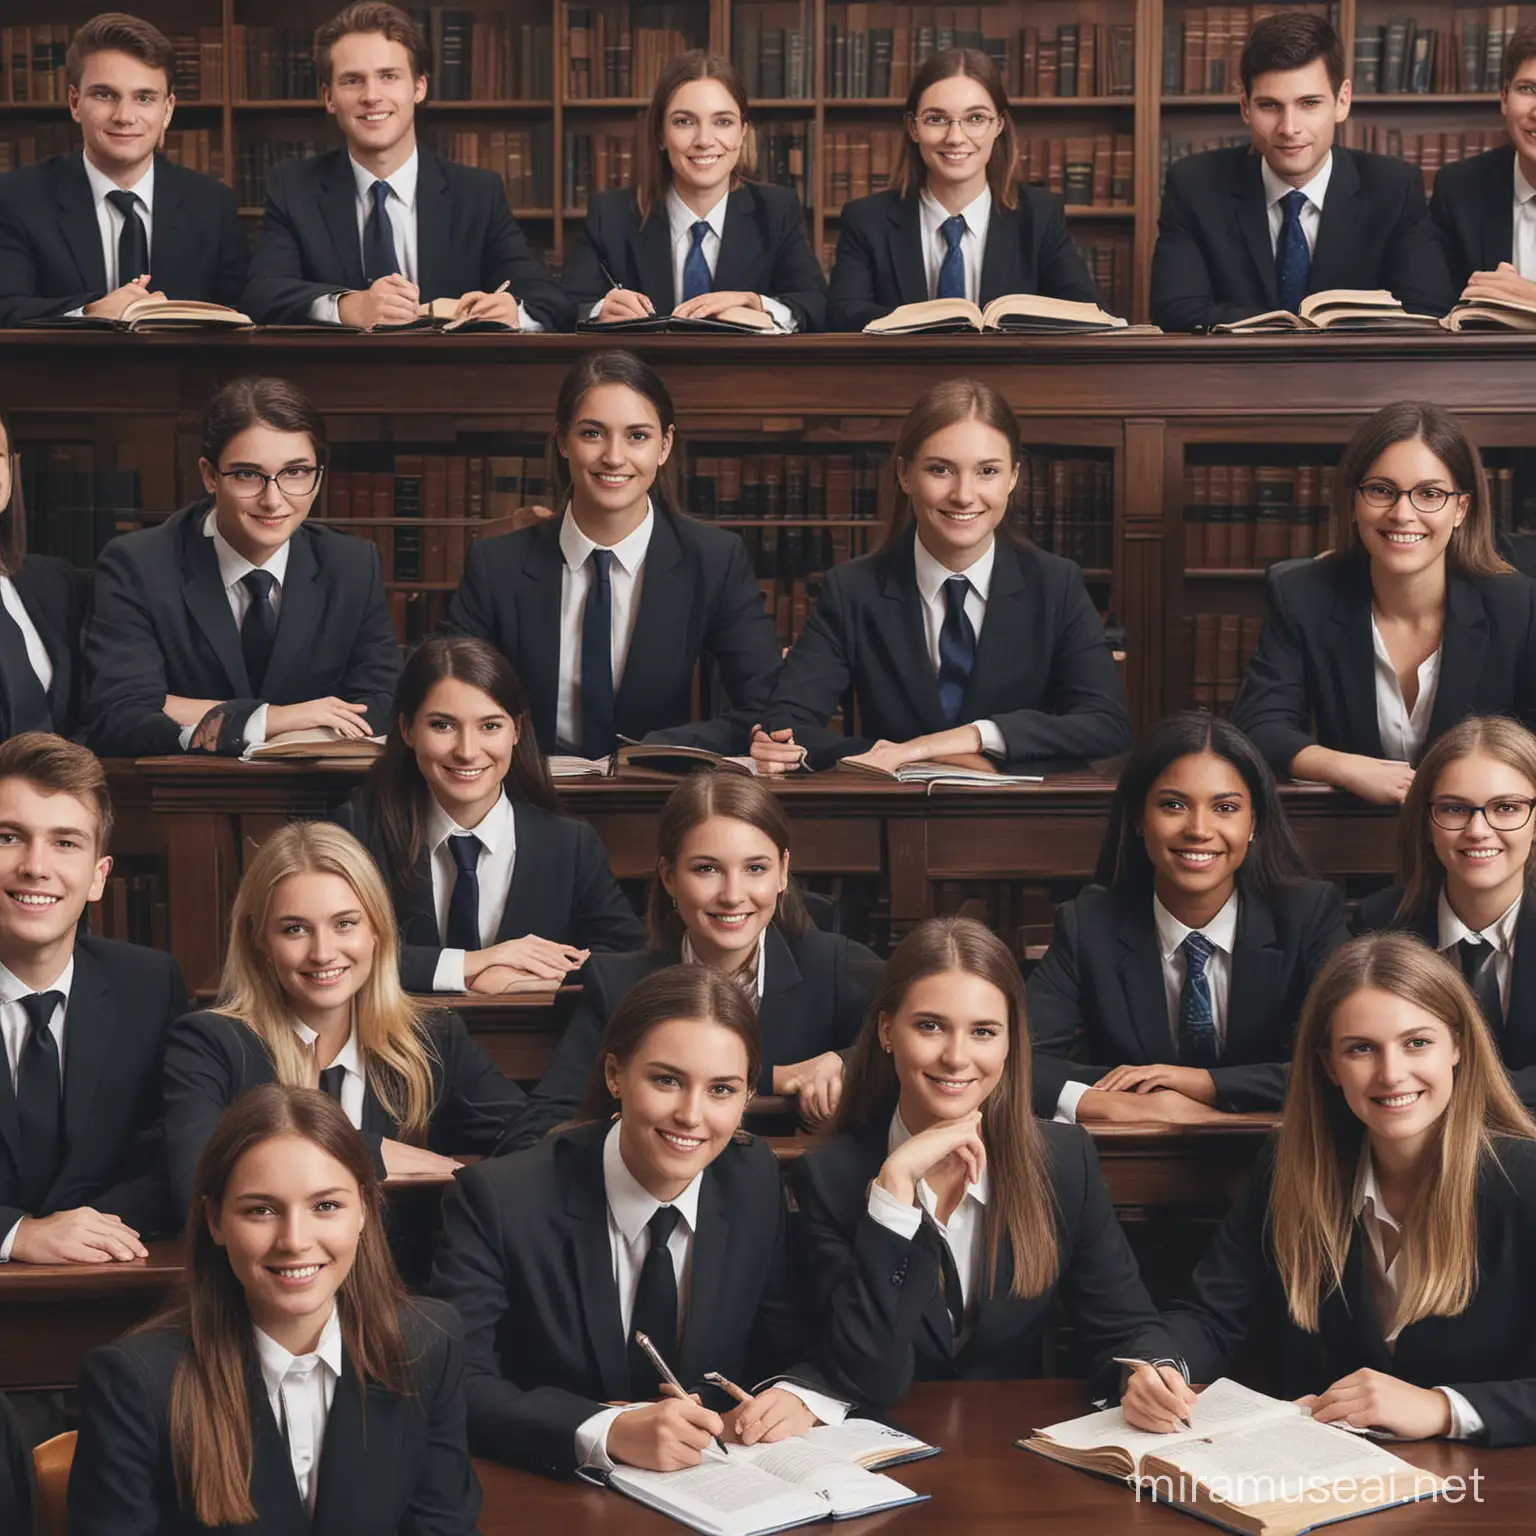 Law Students Mastering Legal Skills in a Classroom Setting